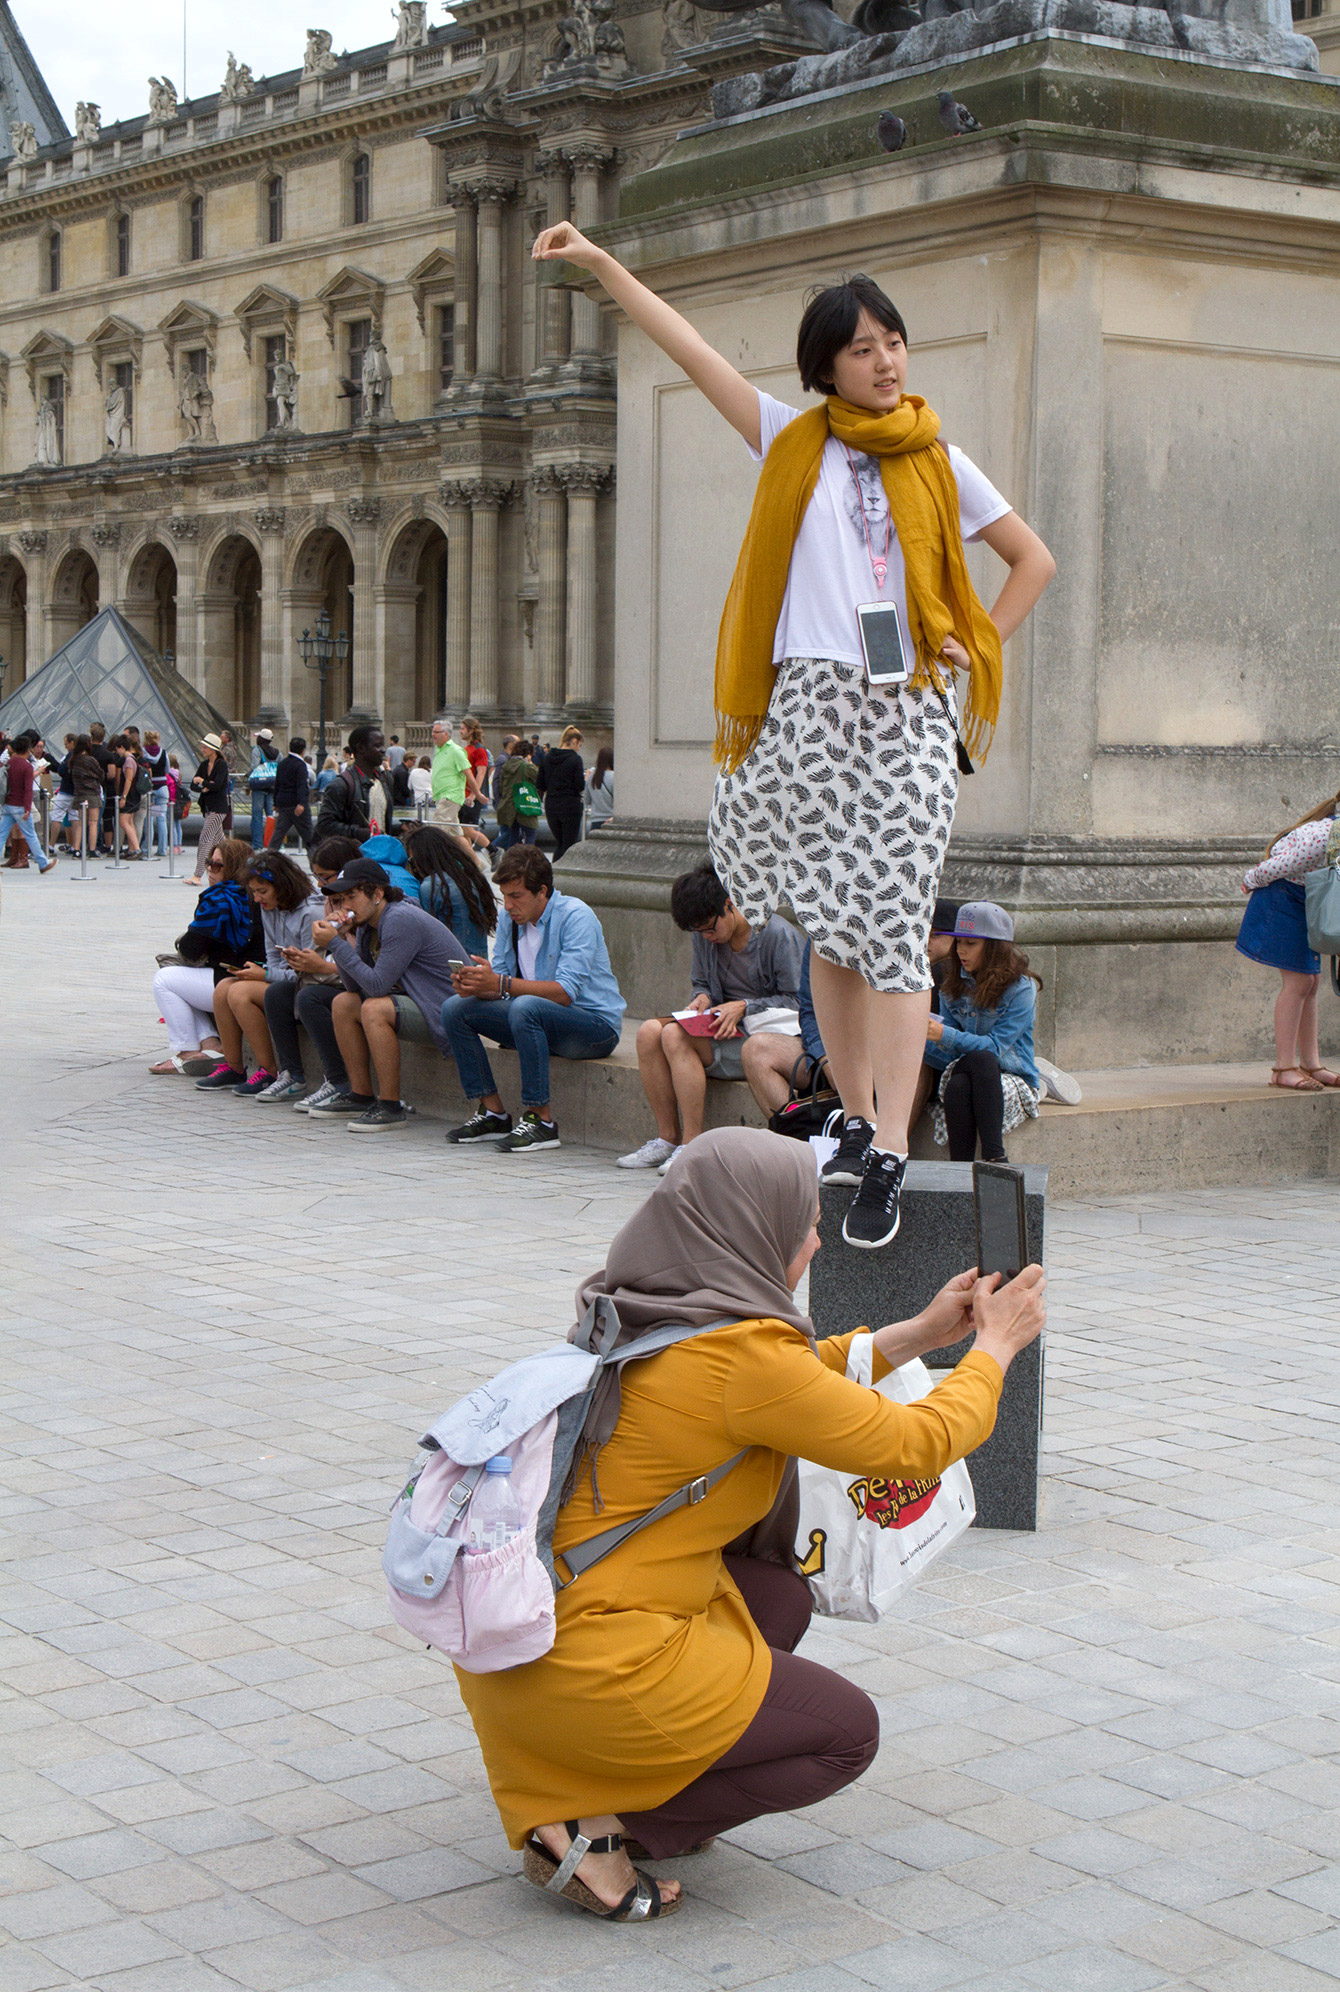 people-on-iphones-louvre